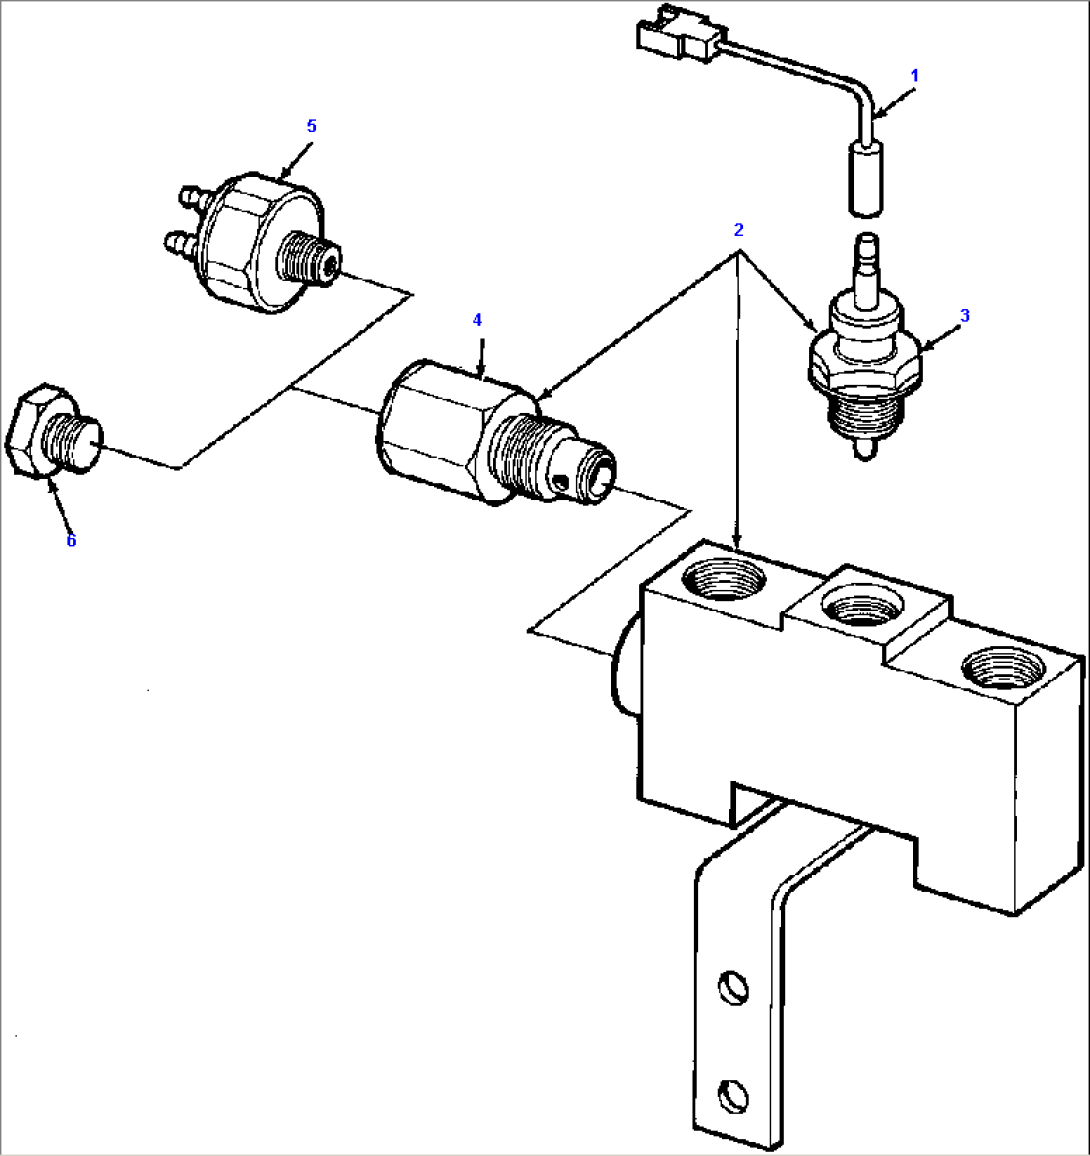 MASTER BRAKE PRESSURE DIFFERENTIAL VALVE USED WITH HYDRAULIC ACTUATED BRAKE LIGHT SWITCH